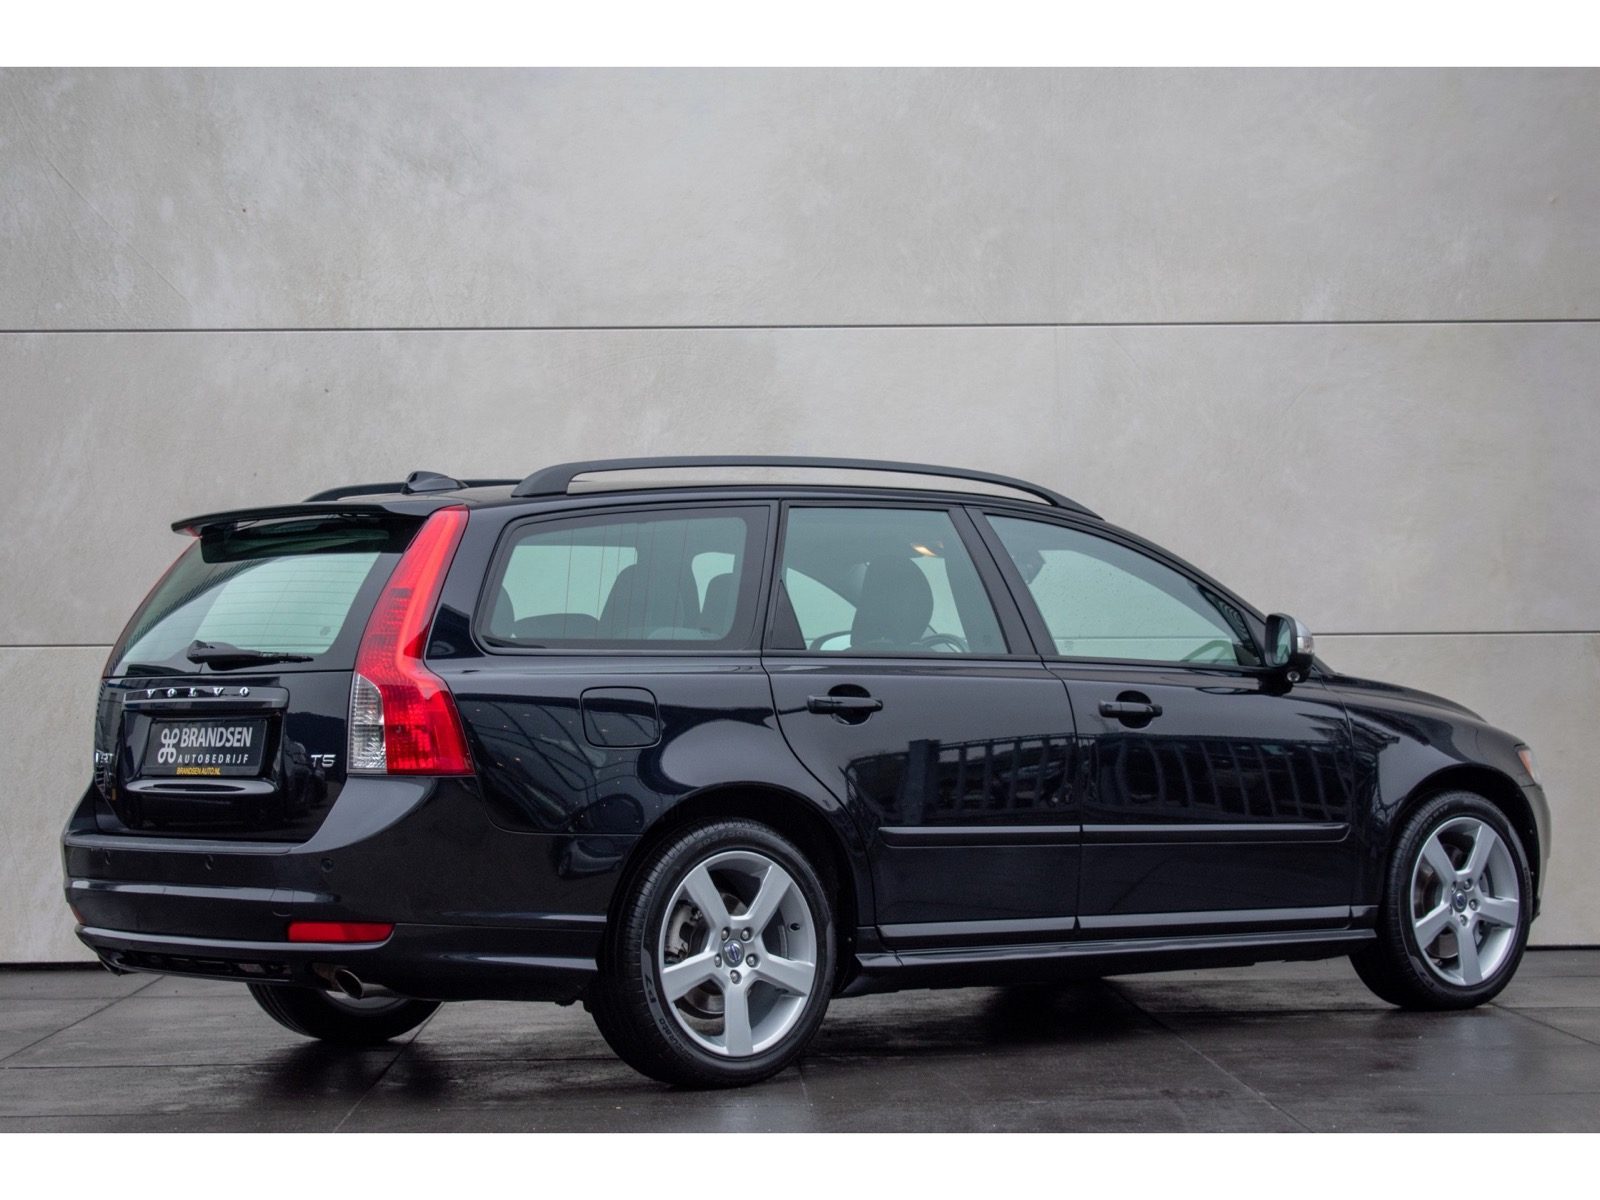 Volvo V50 Scrap Value - Get the Most from Your Aging Volvo!